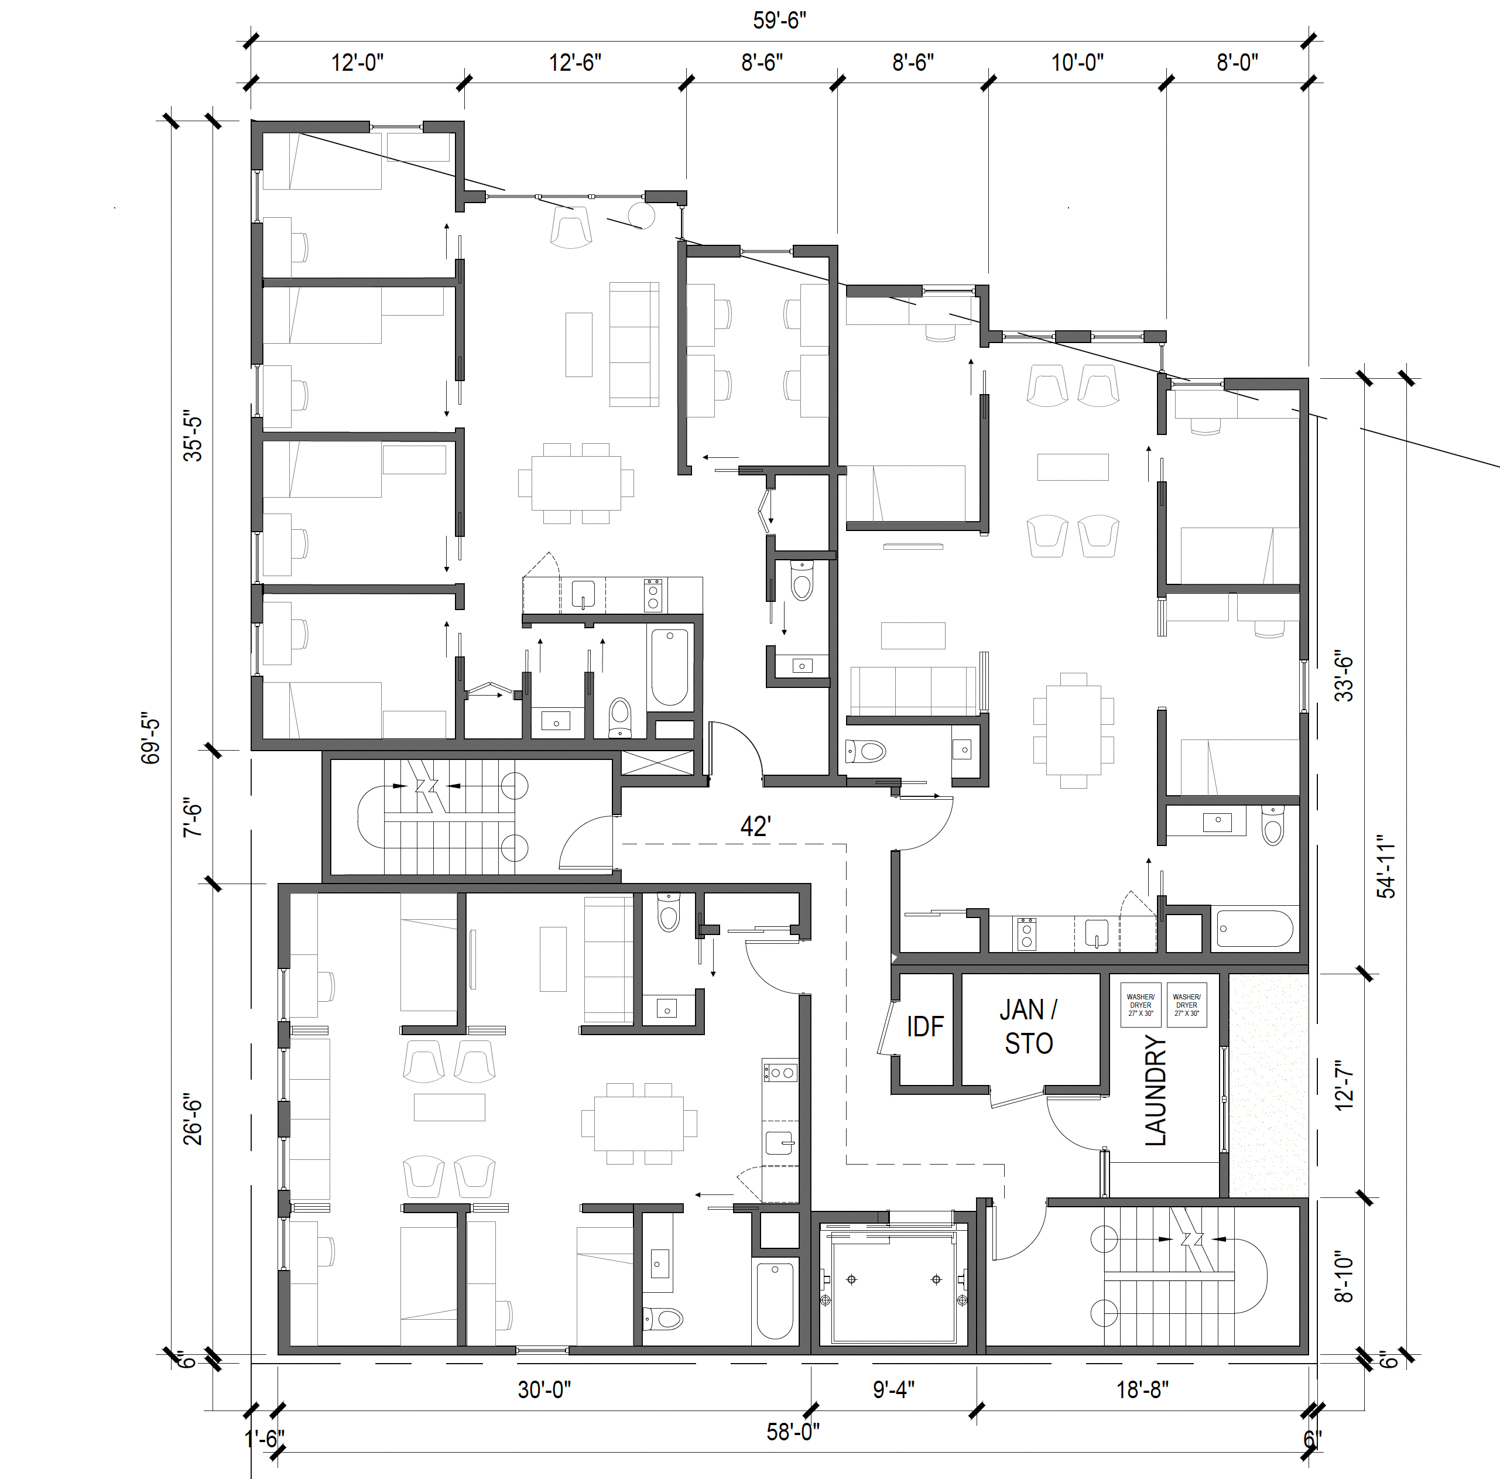 2800 Telegraph Avenue floor plans for levels two through five, elevation by Trachtenberg Architects